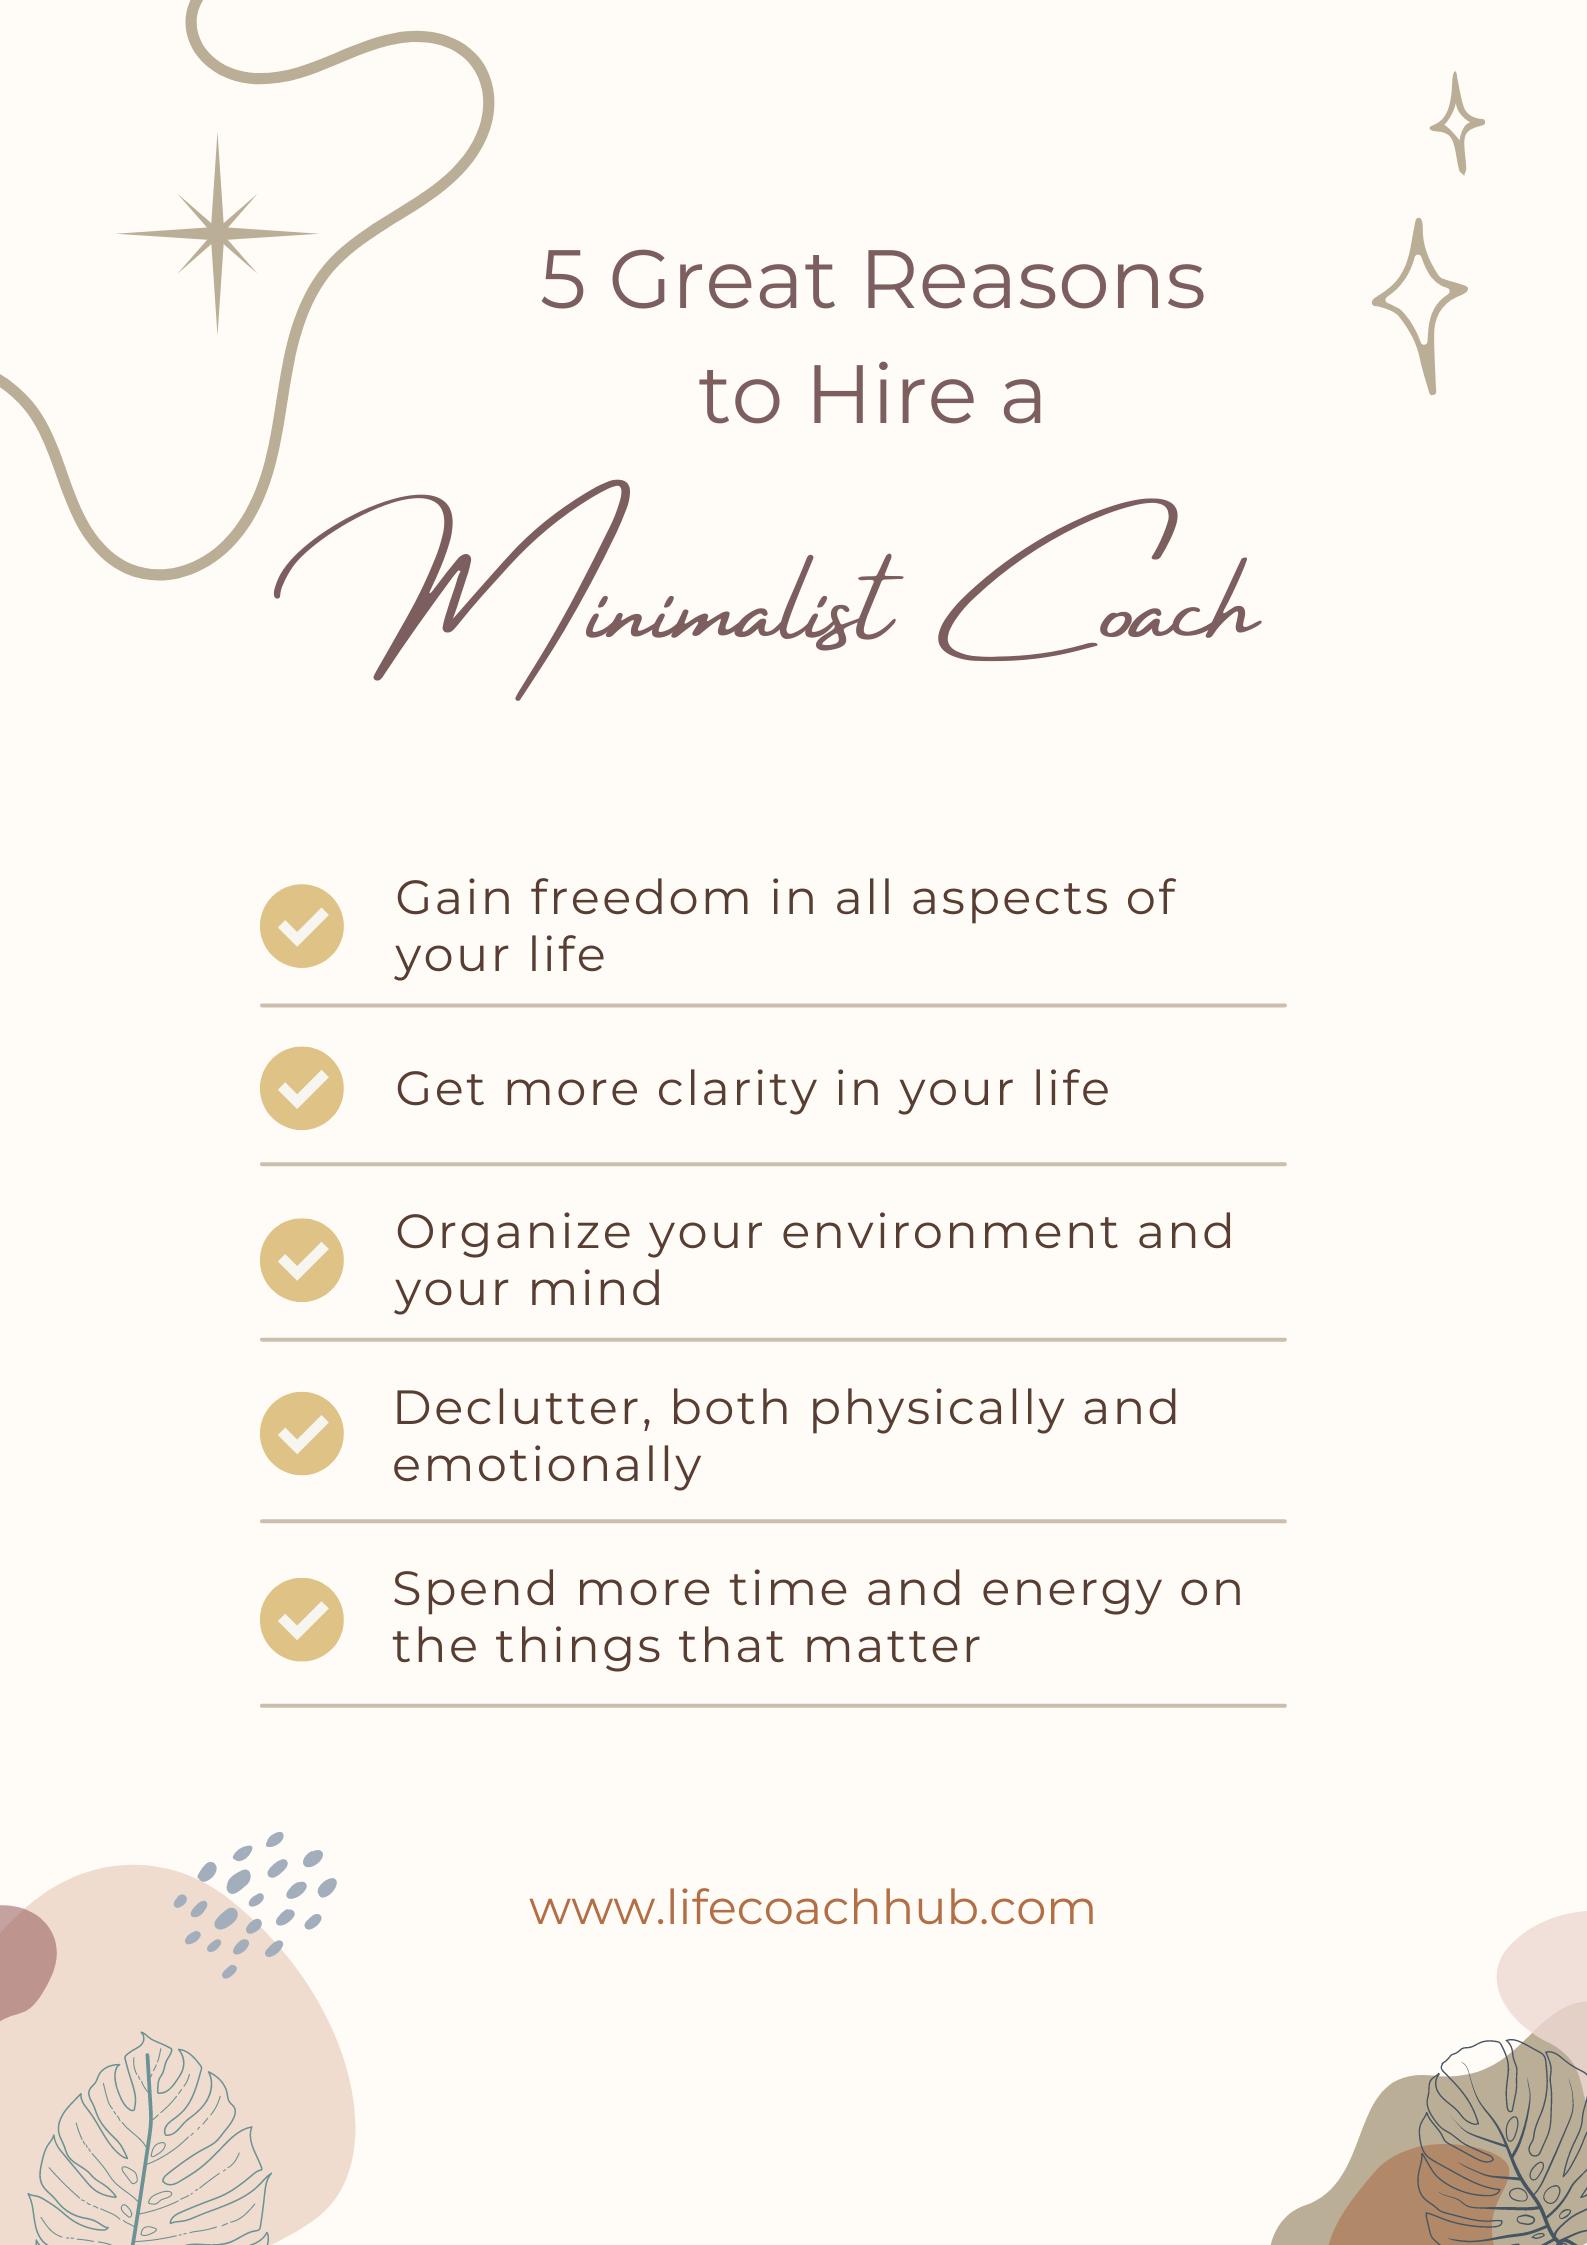 5 great reasons to hire a minimalist coach